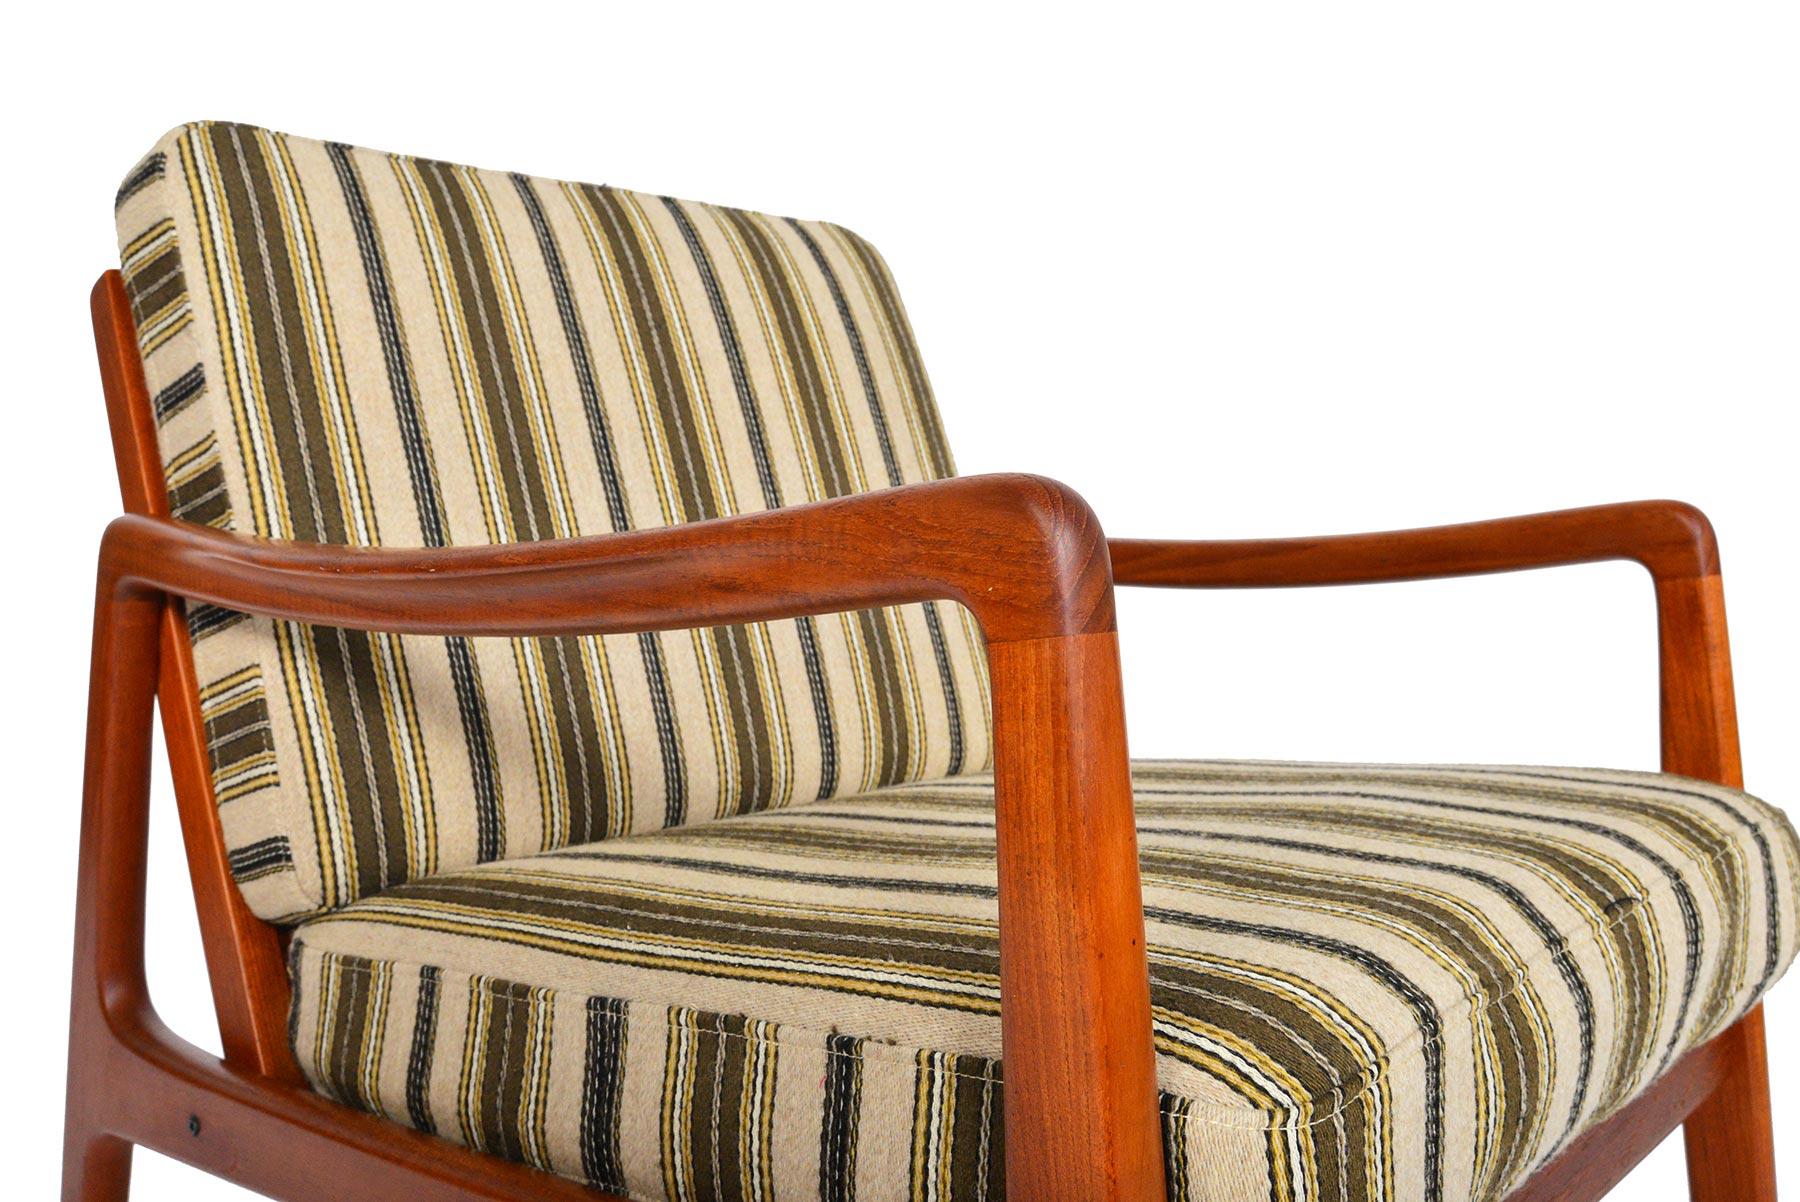 This model 109 teak lounge chair was designed by Ole Wanscher for France & Son in 1951. Crafted in solid teak with elegant lines, this chair is popular with designers and collectors alike. Beautiful and smooth joinery throughout this chair marks its